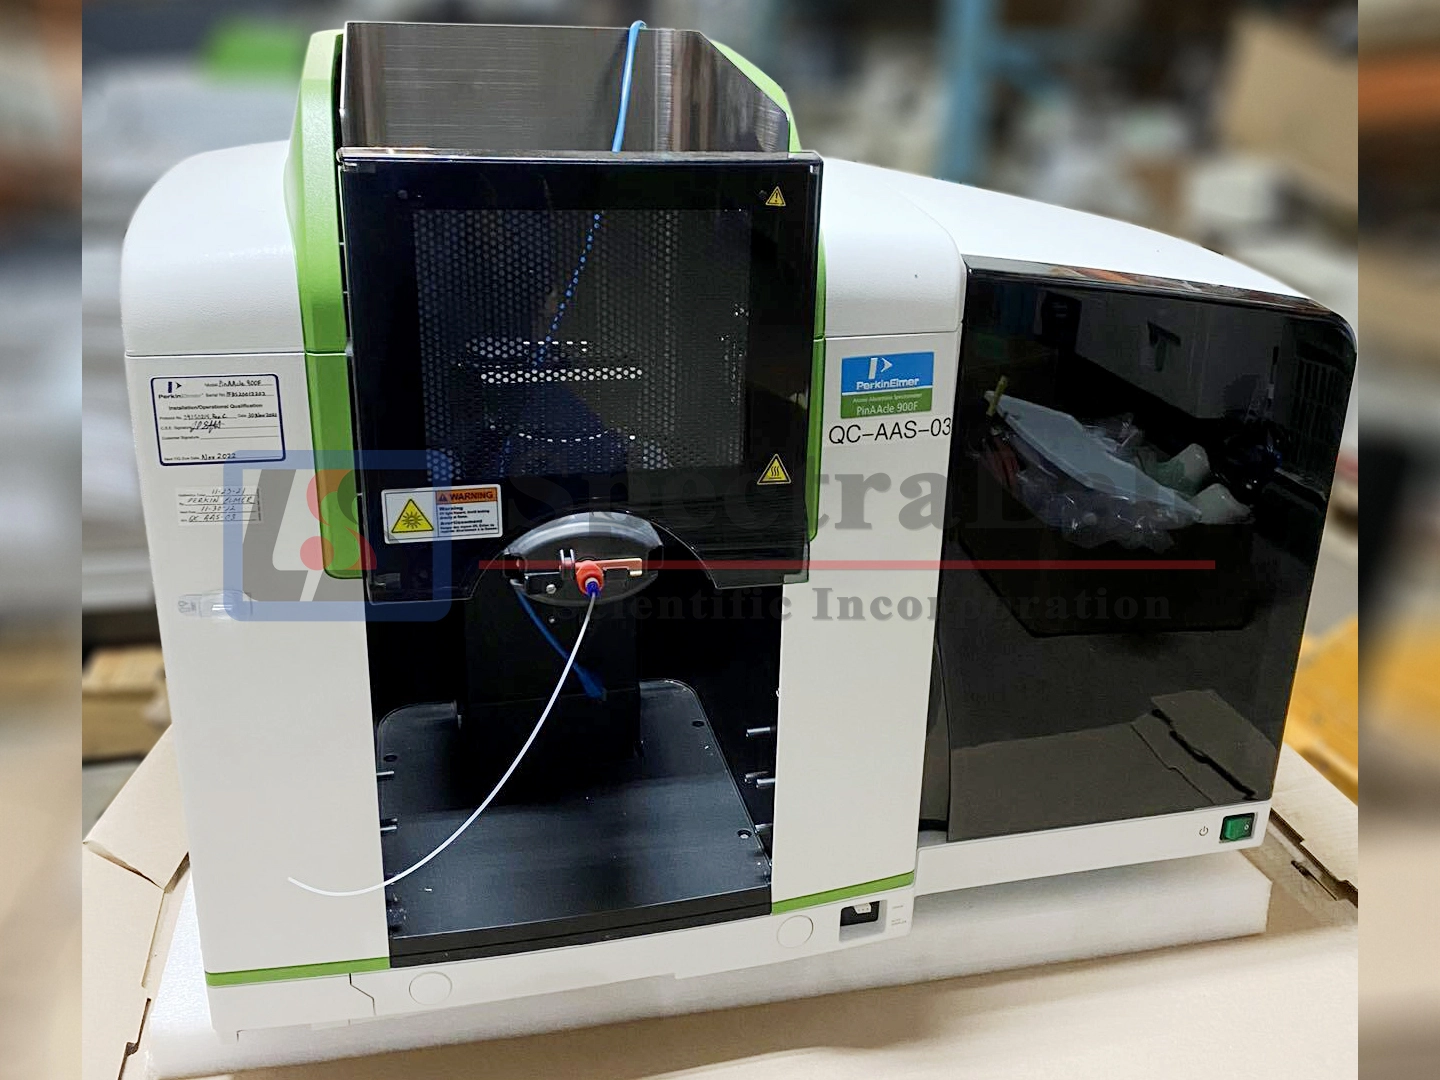 PerkinElmer PinAAcle 900F Flame Atomic Absorption Spectrometer